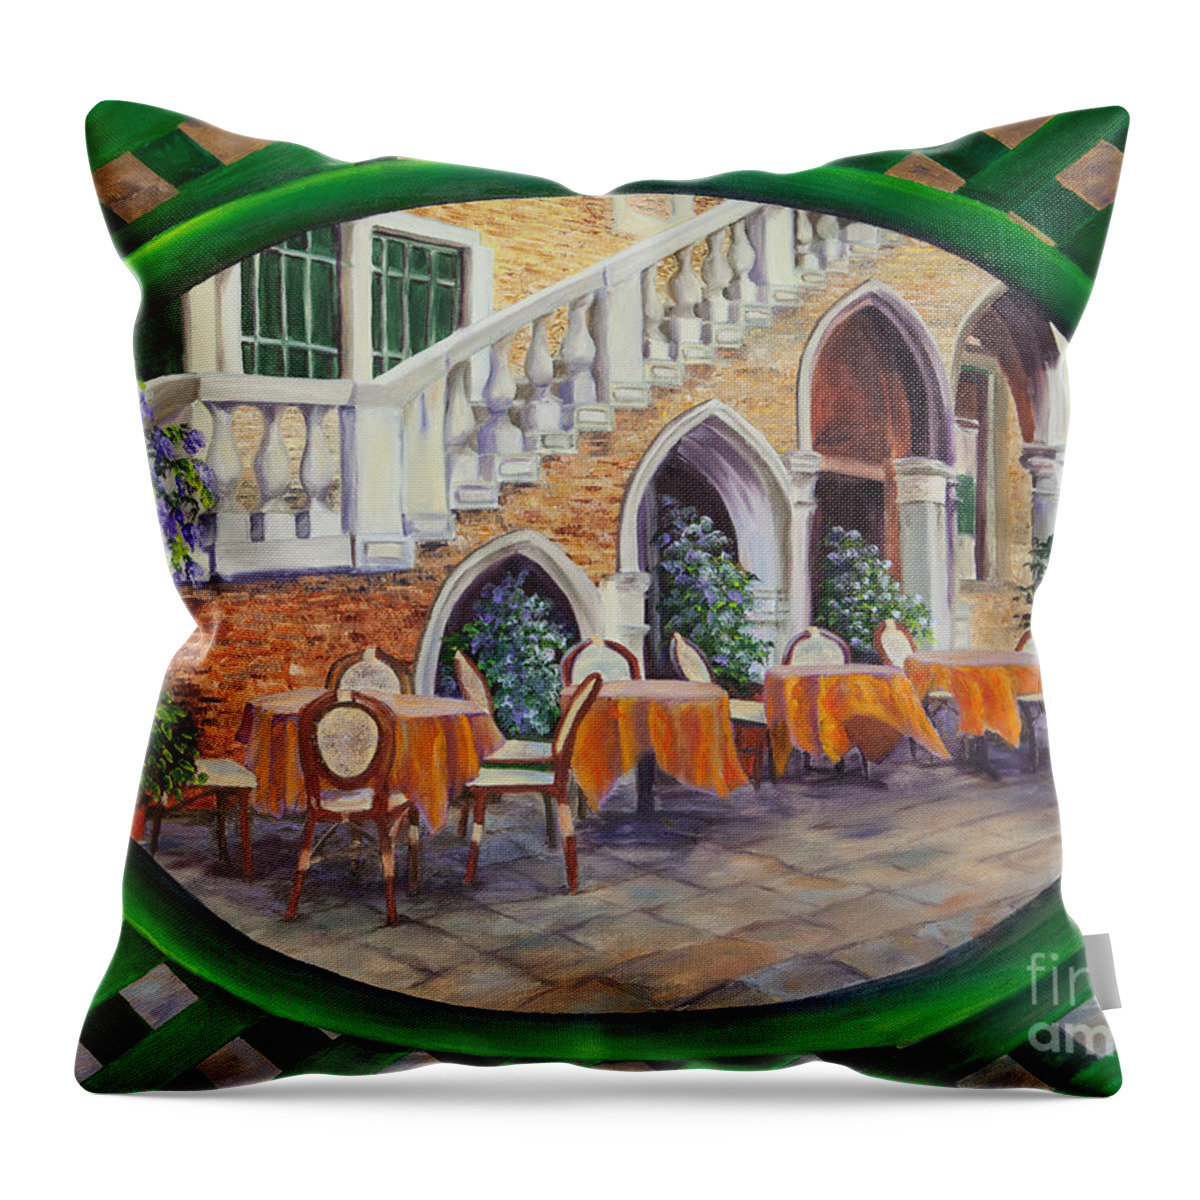 Venice Italy Art Throw Pillow featuring the painting Outdoor Cafe In Venice by Charlotte Blanchard